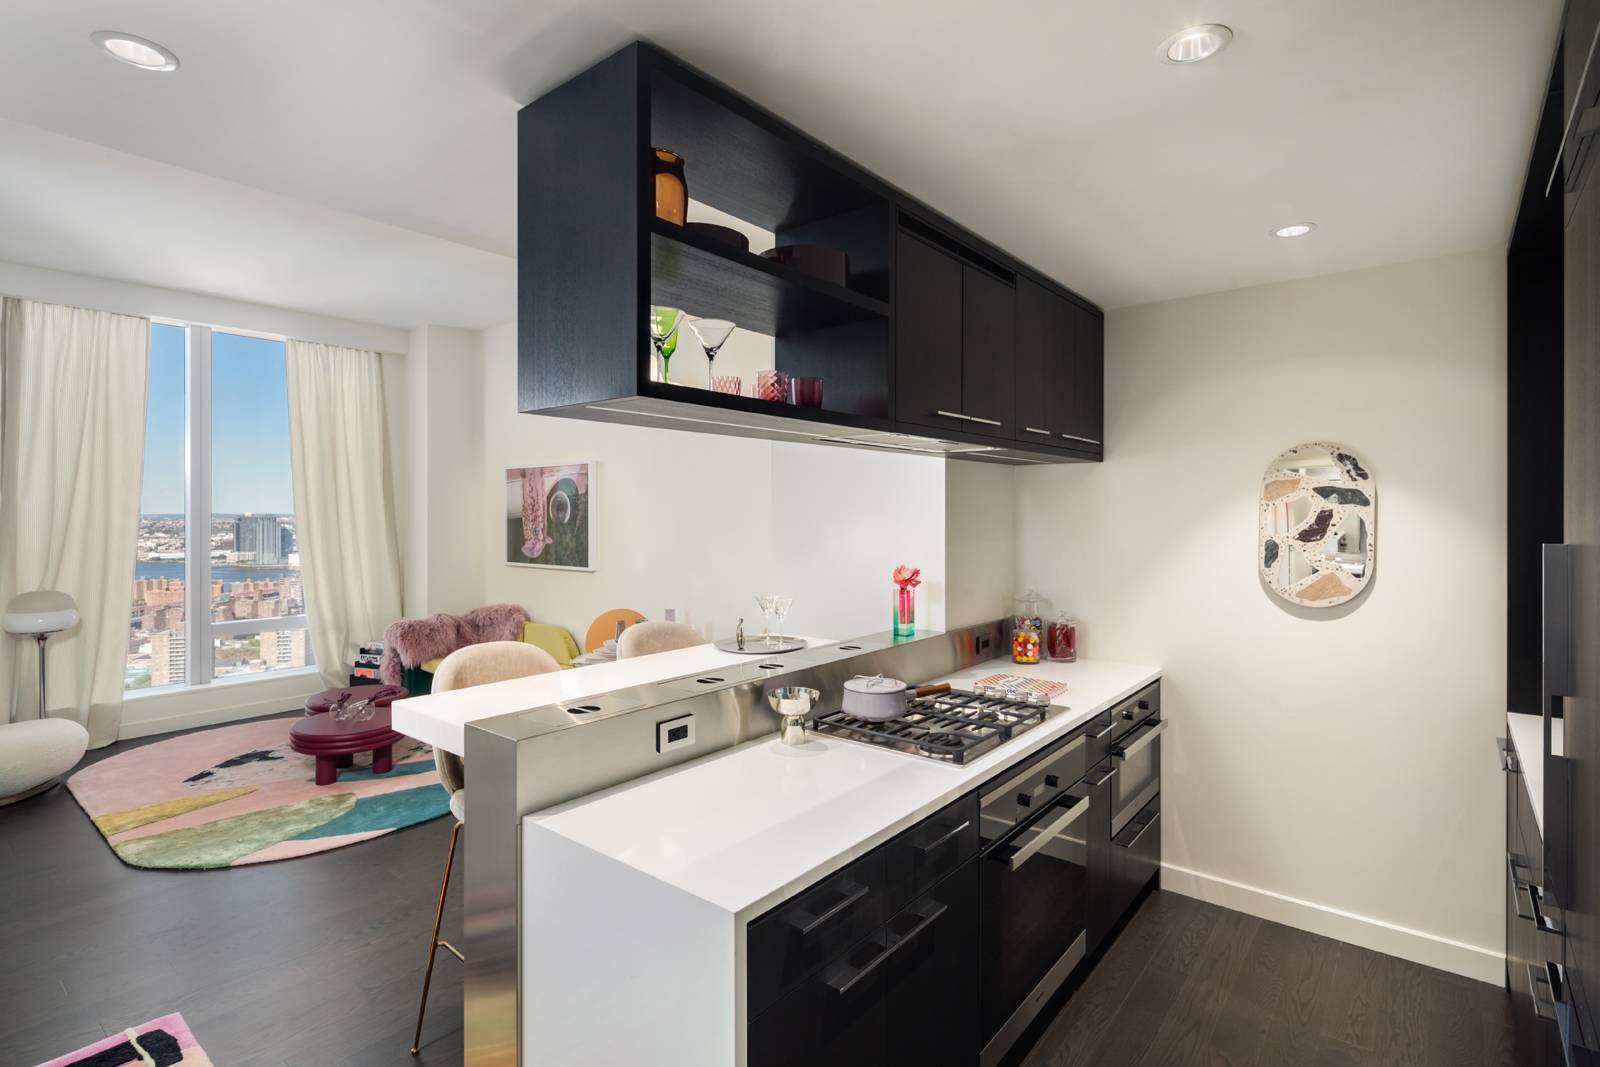 Residence 33E is a 694 square foot one bedroom, one bathroom with an open gourmet kitchen and breakfast bar.